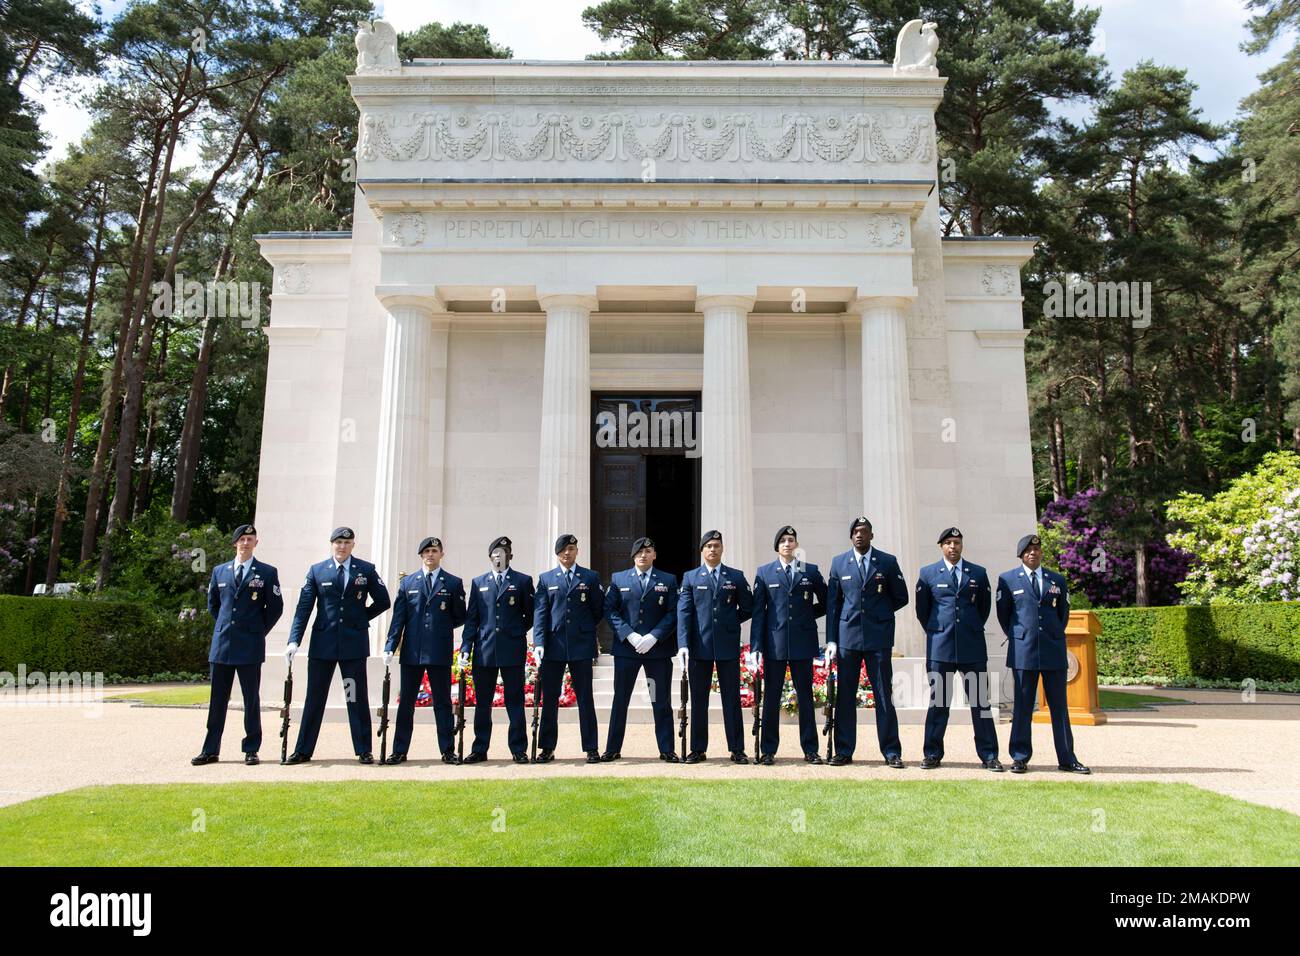 U.S. Air Force 422nd Security Forces Squadron Defenders pose for a group photo after a Memorial Day ceremony at the Brookwood American Cemetery, England, May 29, 2022. Memorial Day provides us a solemn opportunity to remember our fallen brothers and sisters in arms, reflect upon their courageous sacrifice, and show gratitude for the freedom they gave their lives to defend. It also affords us the opportunity to pay homage to those families who lost their loved ones in service to the Nation-and continue to feel the full weight of that sacrifice today. Stock Photo